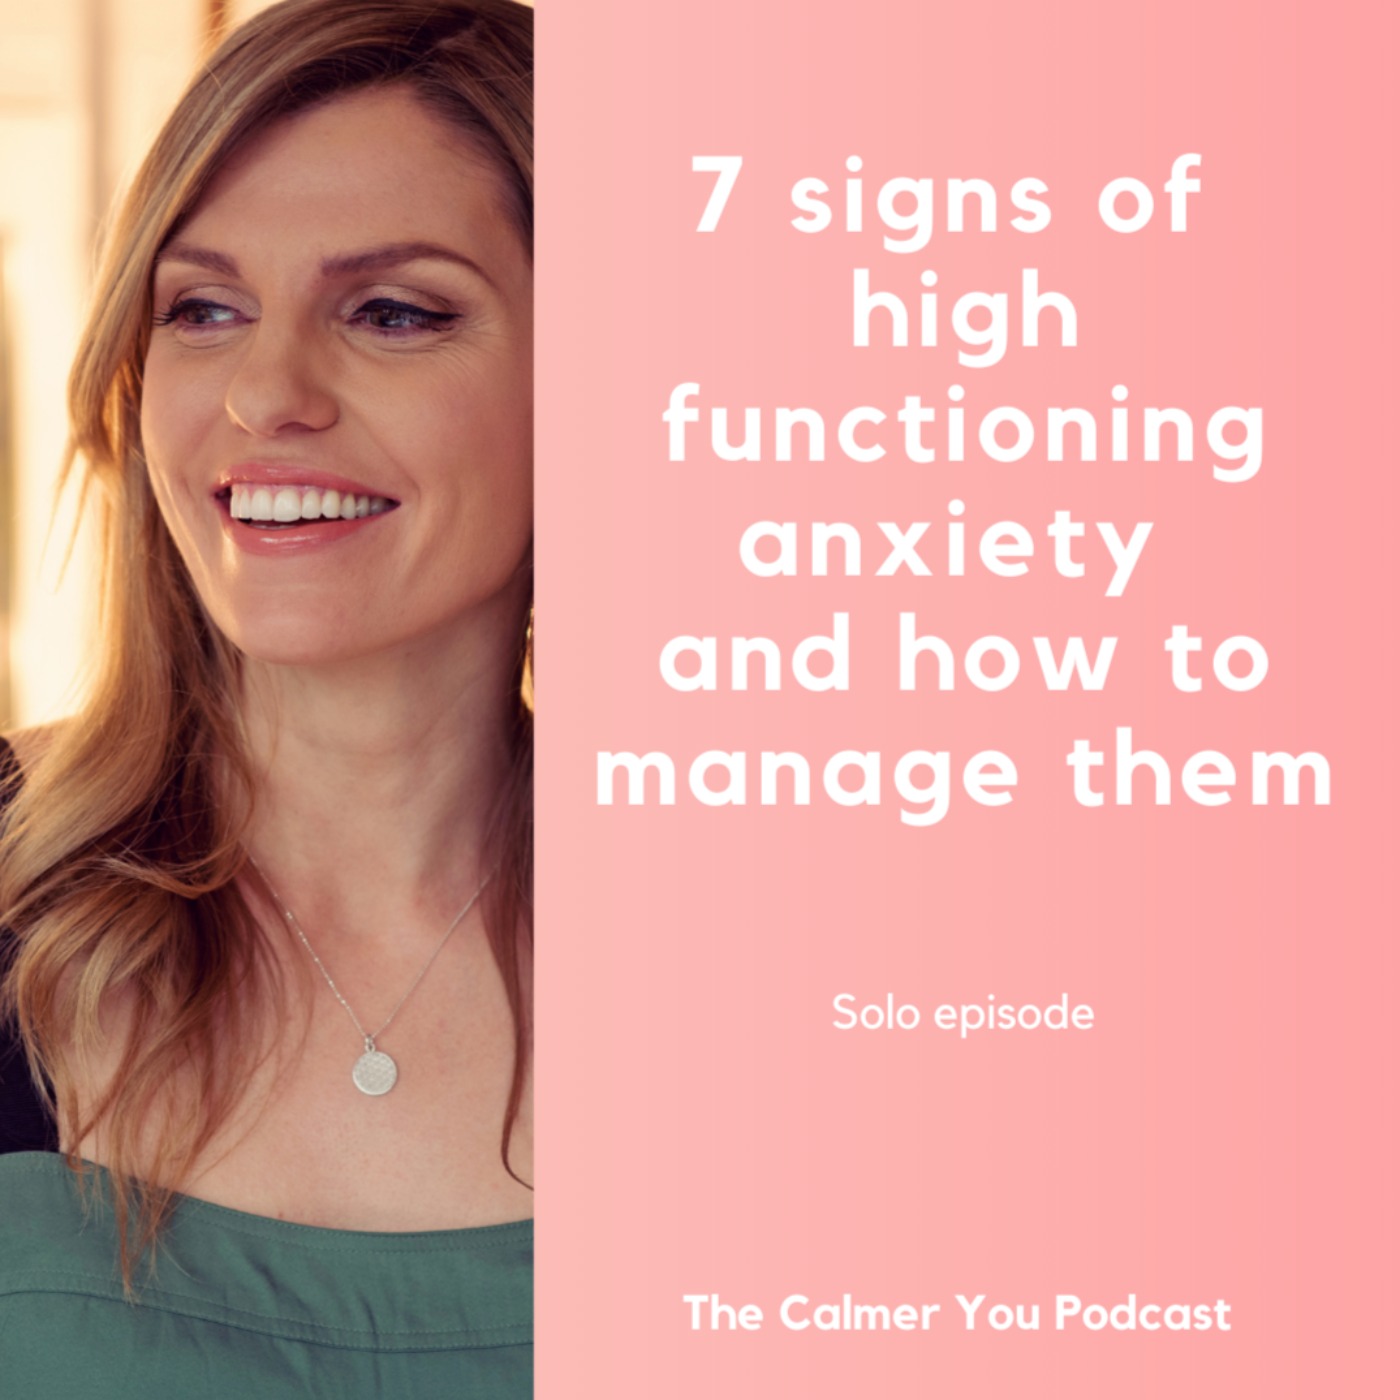 Ep 161. 7 Signs of High Functioning Anxiety and how to manage them